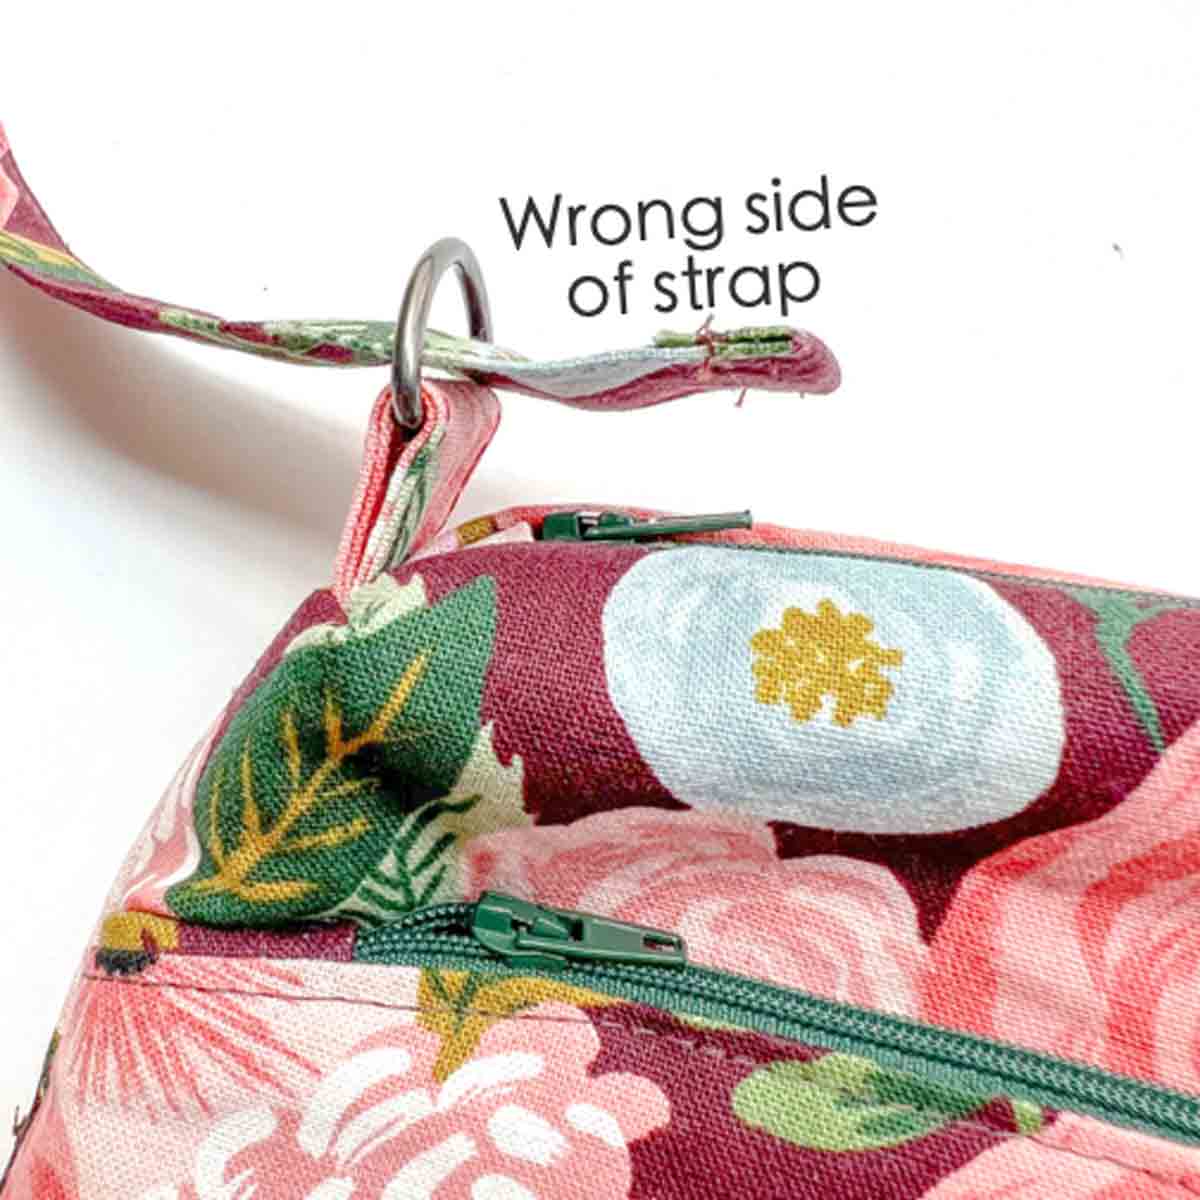 thread wrong side of bag strap into other D loop of bag. crossbody bag pattern